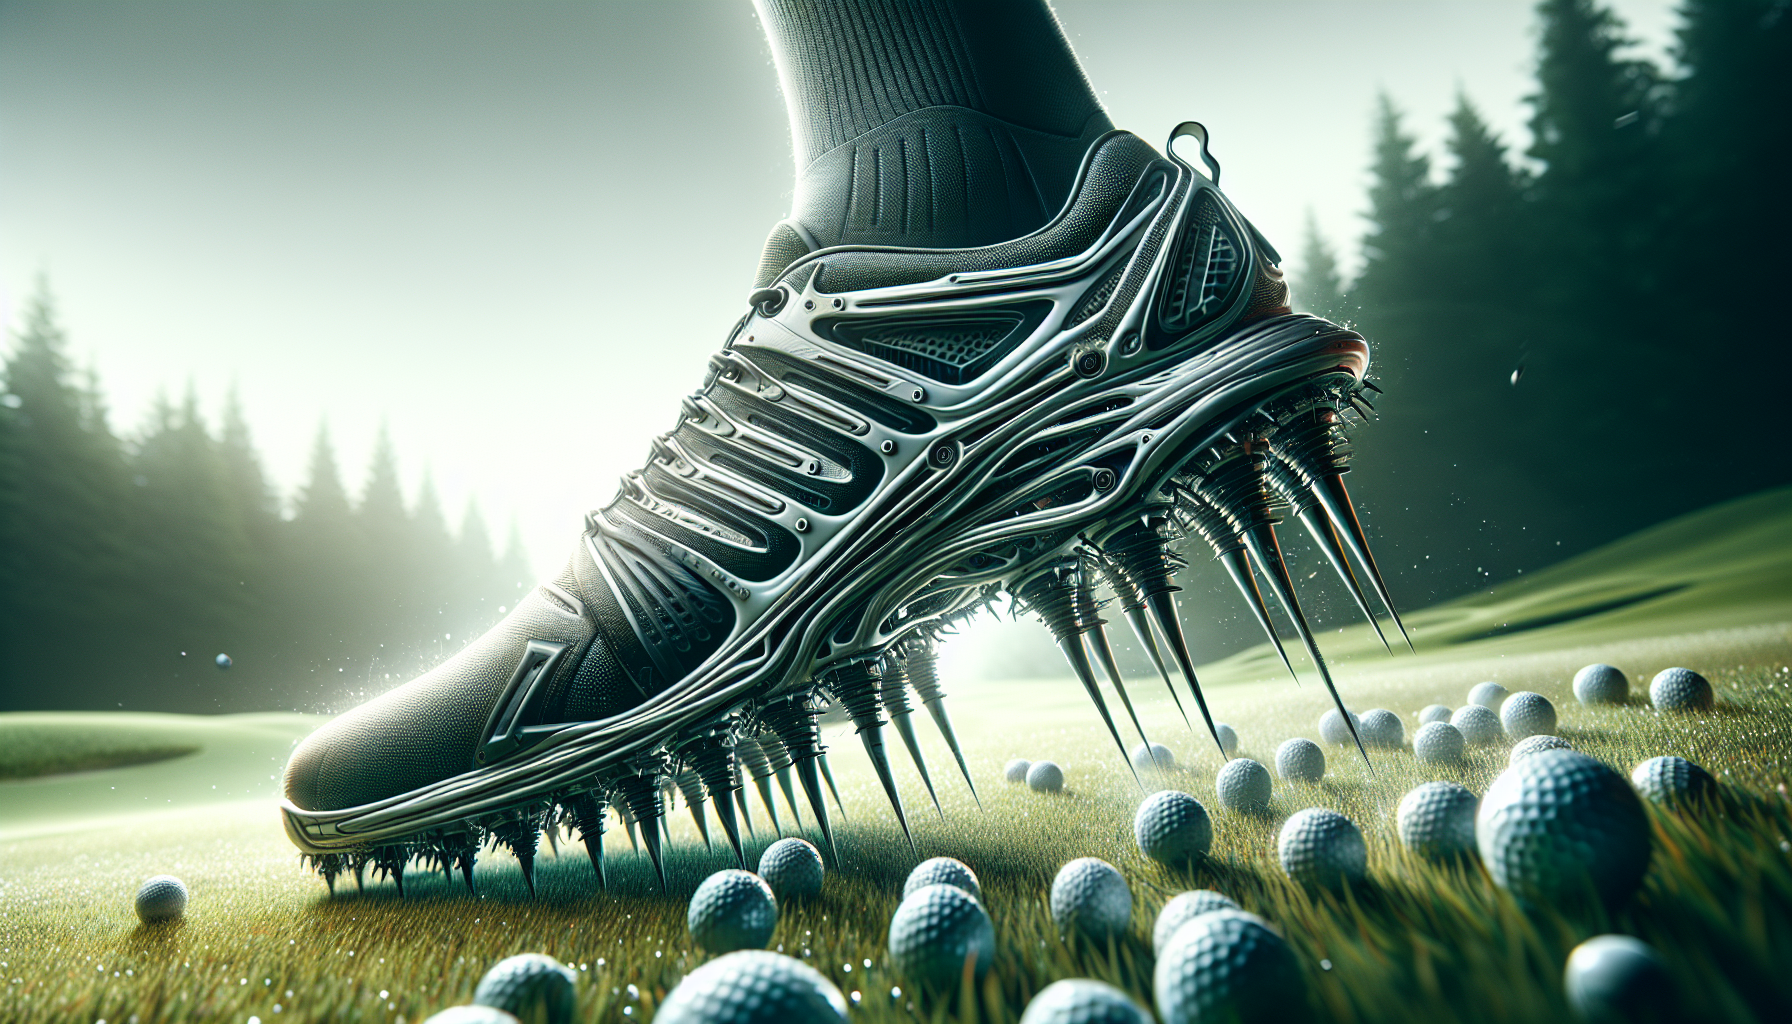 Advanced technology in spiked golf shoes